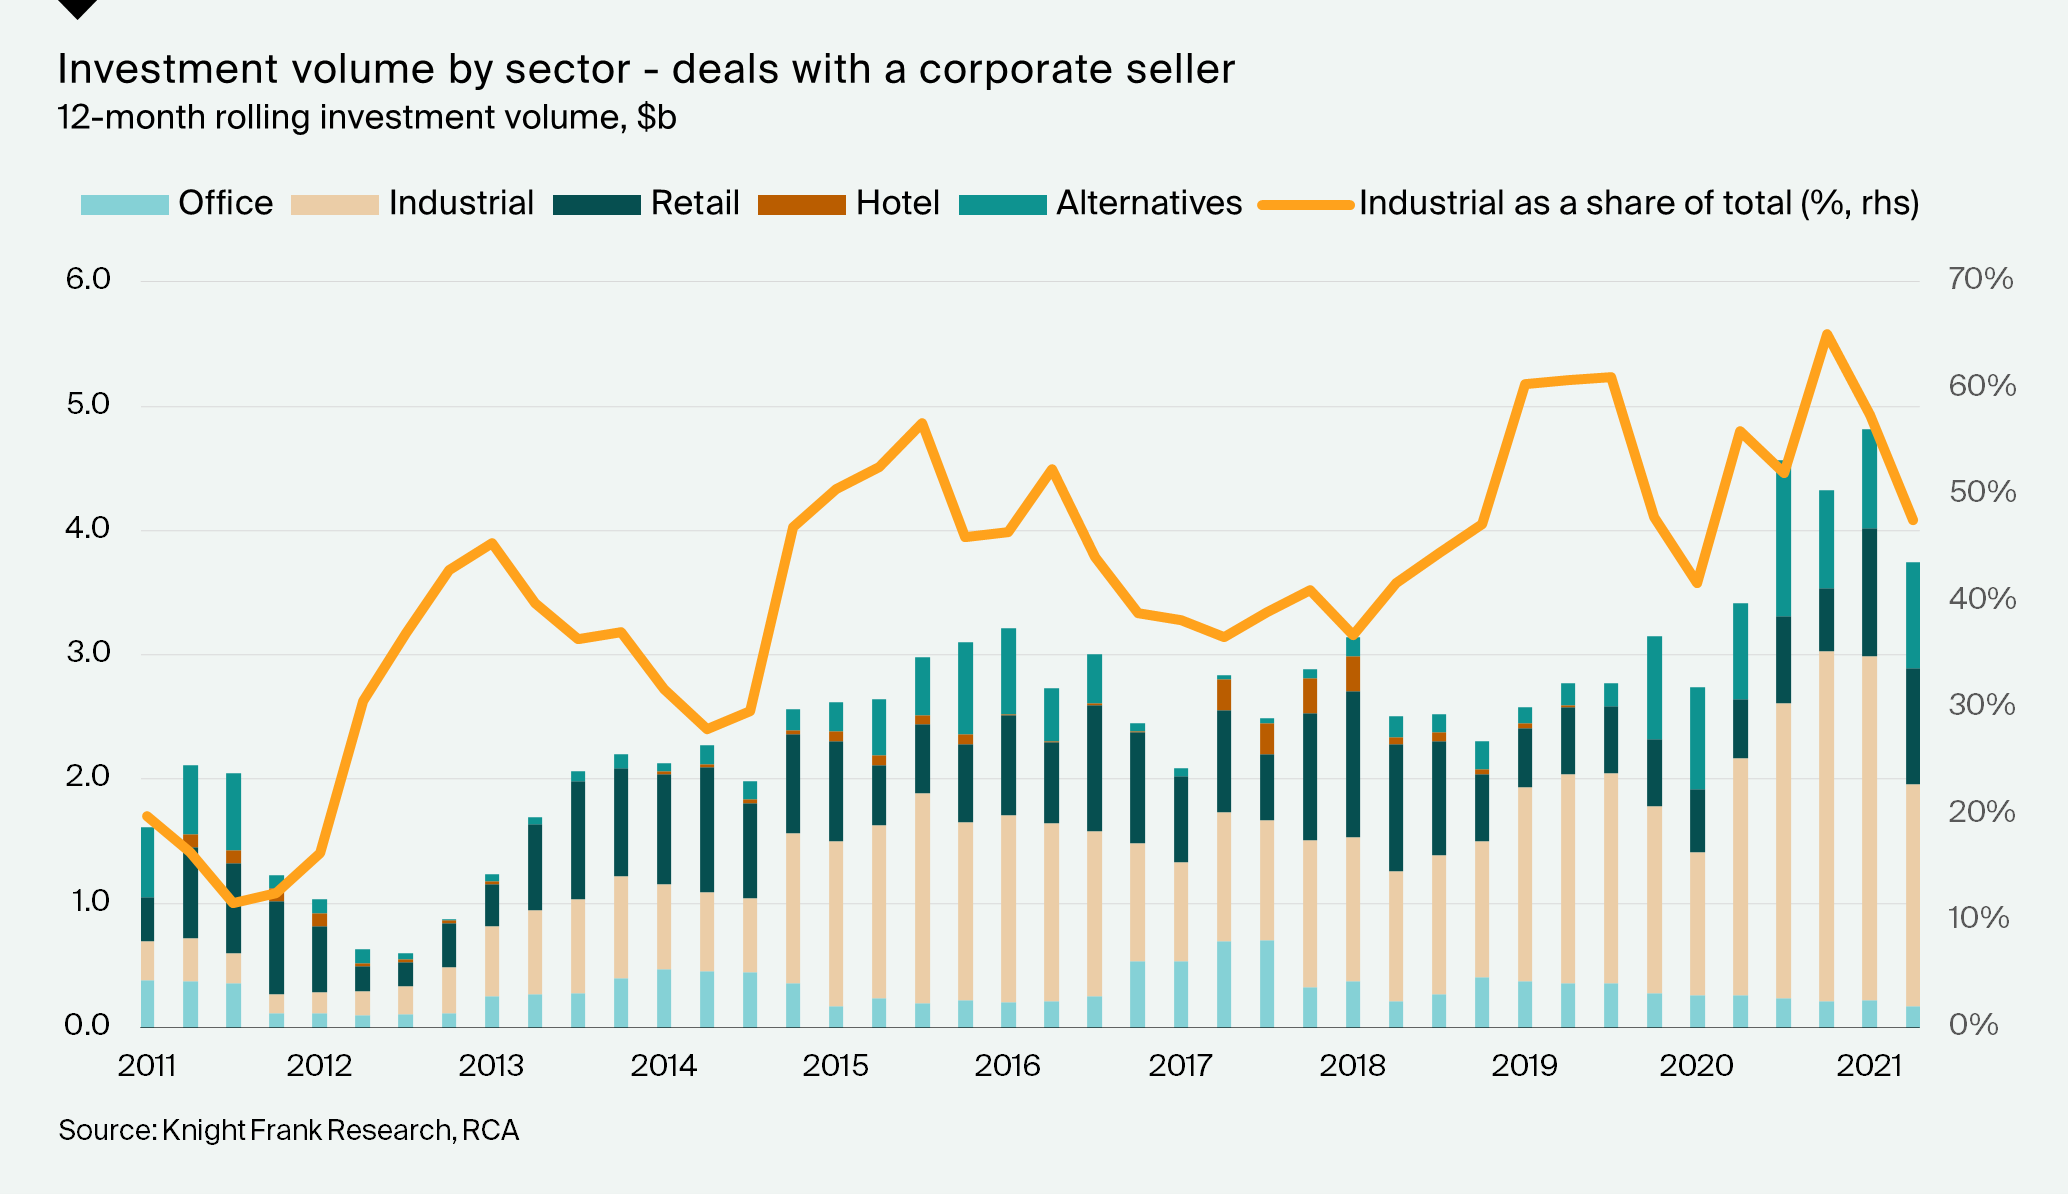 Investment volume by sector - deals with a corporate seller